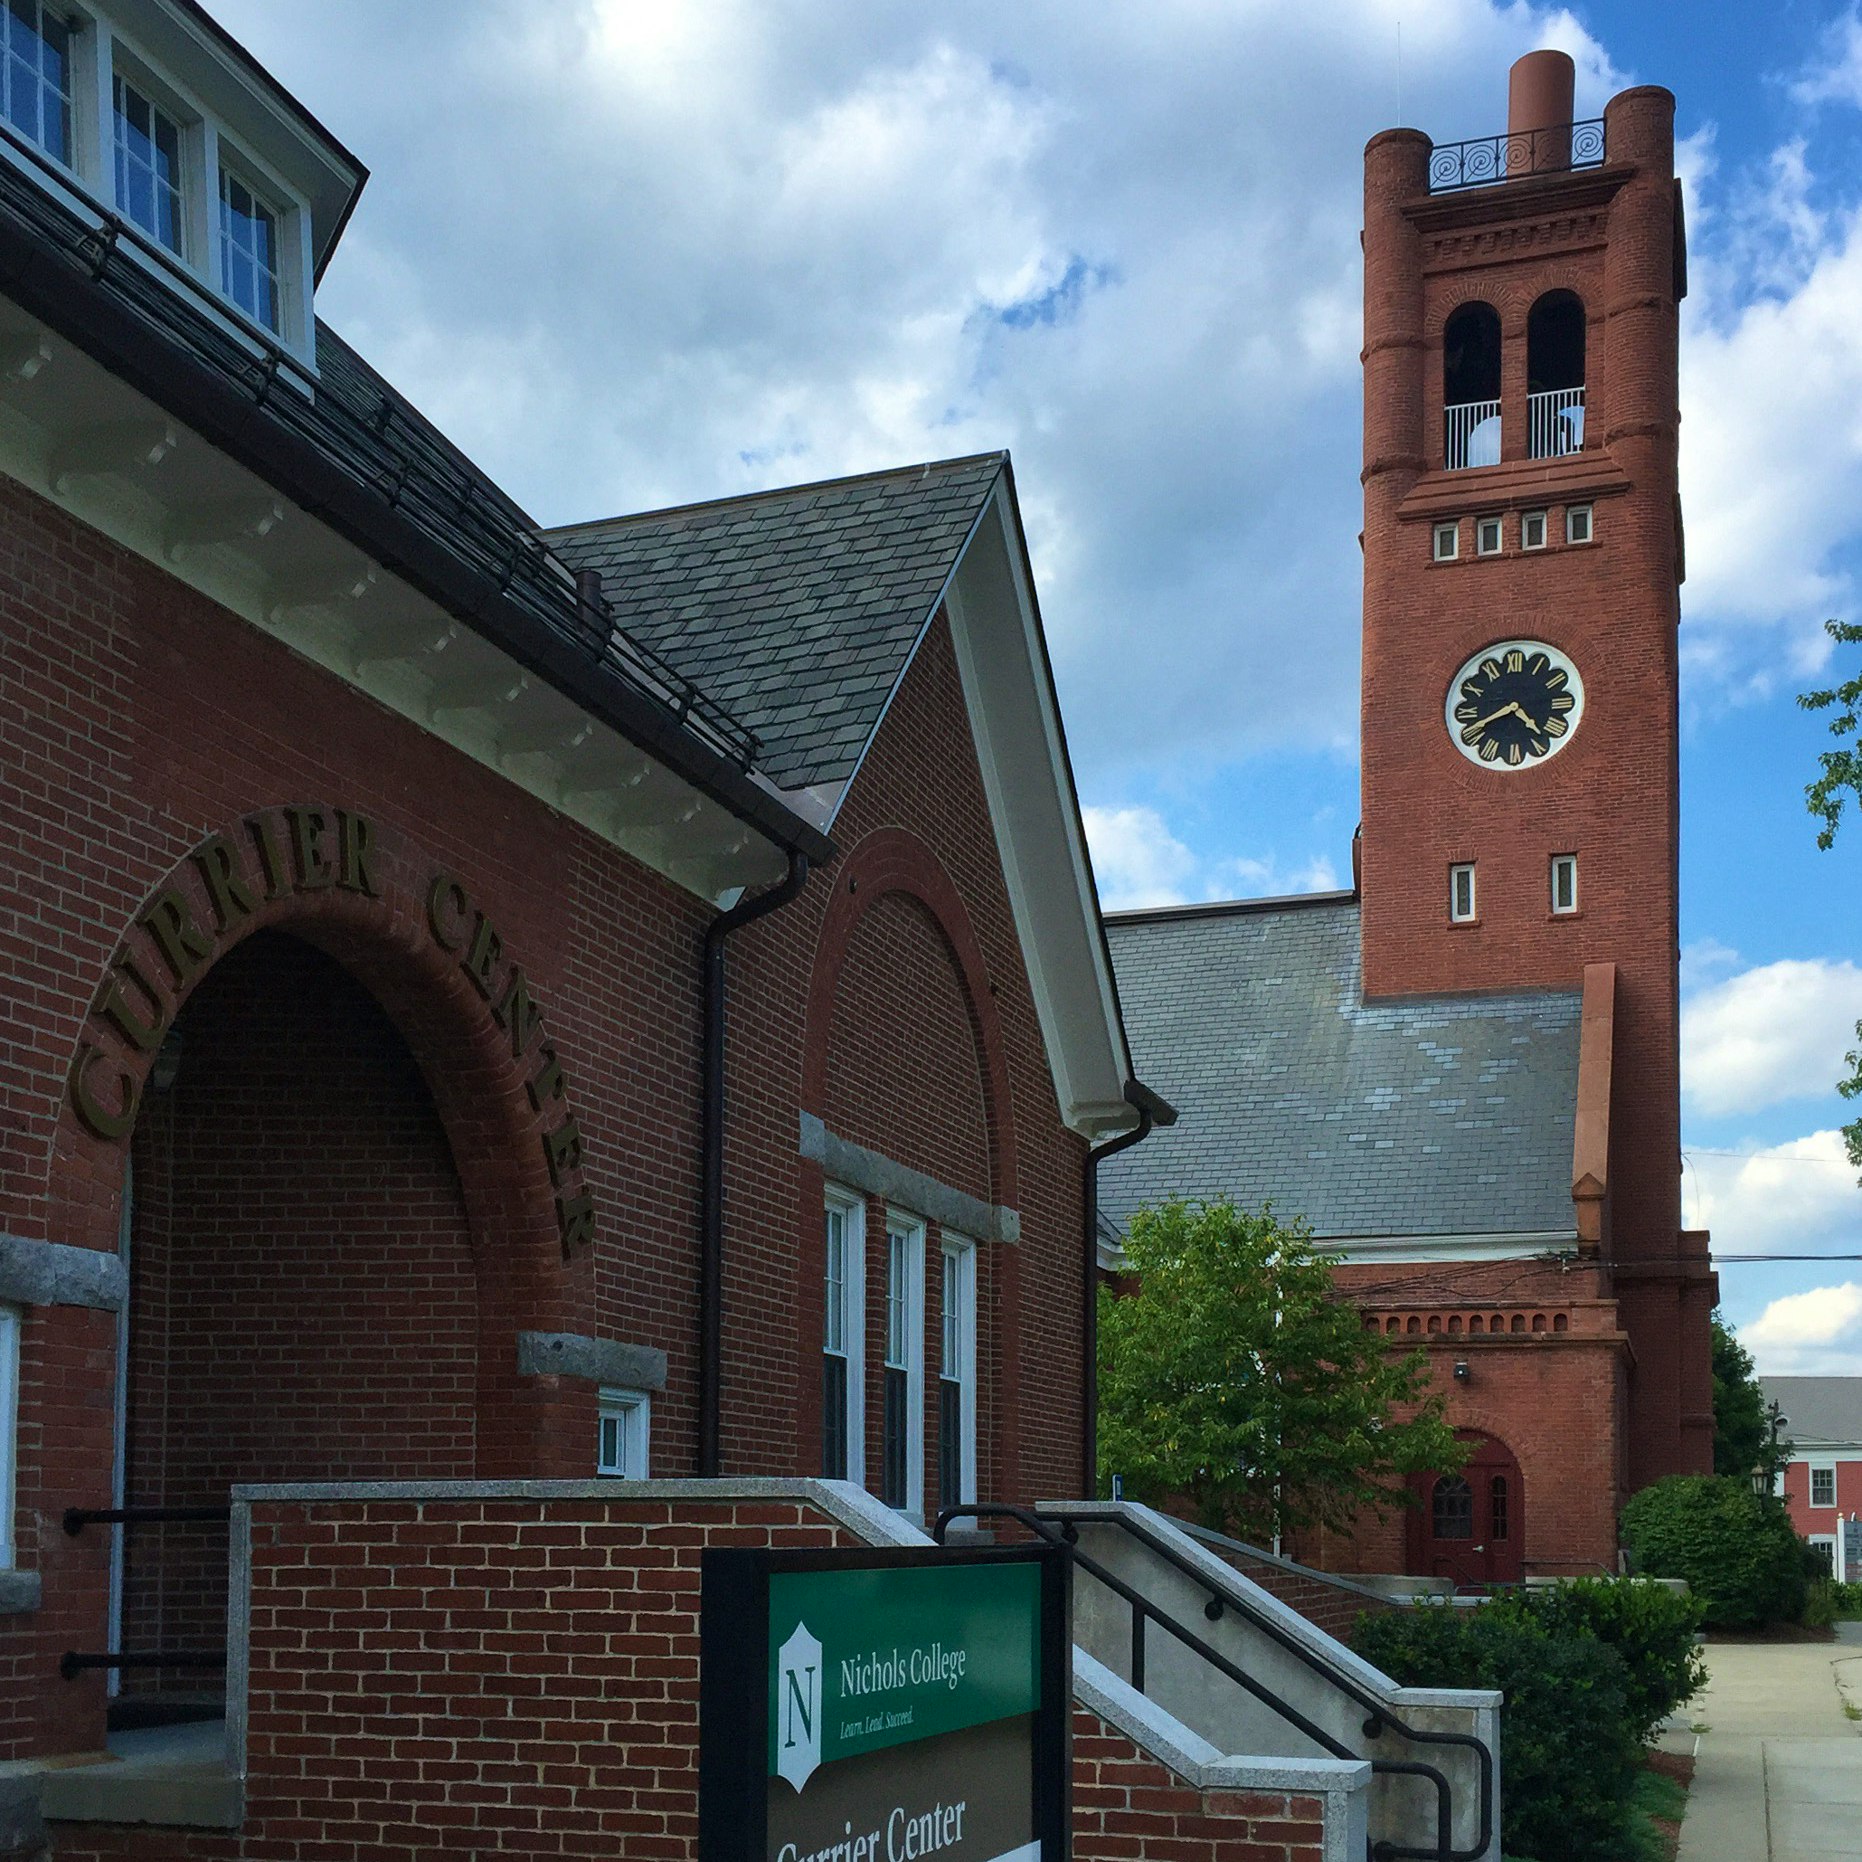 graduation-rates-and-salaries-for-nichols-college-students